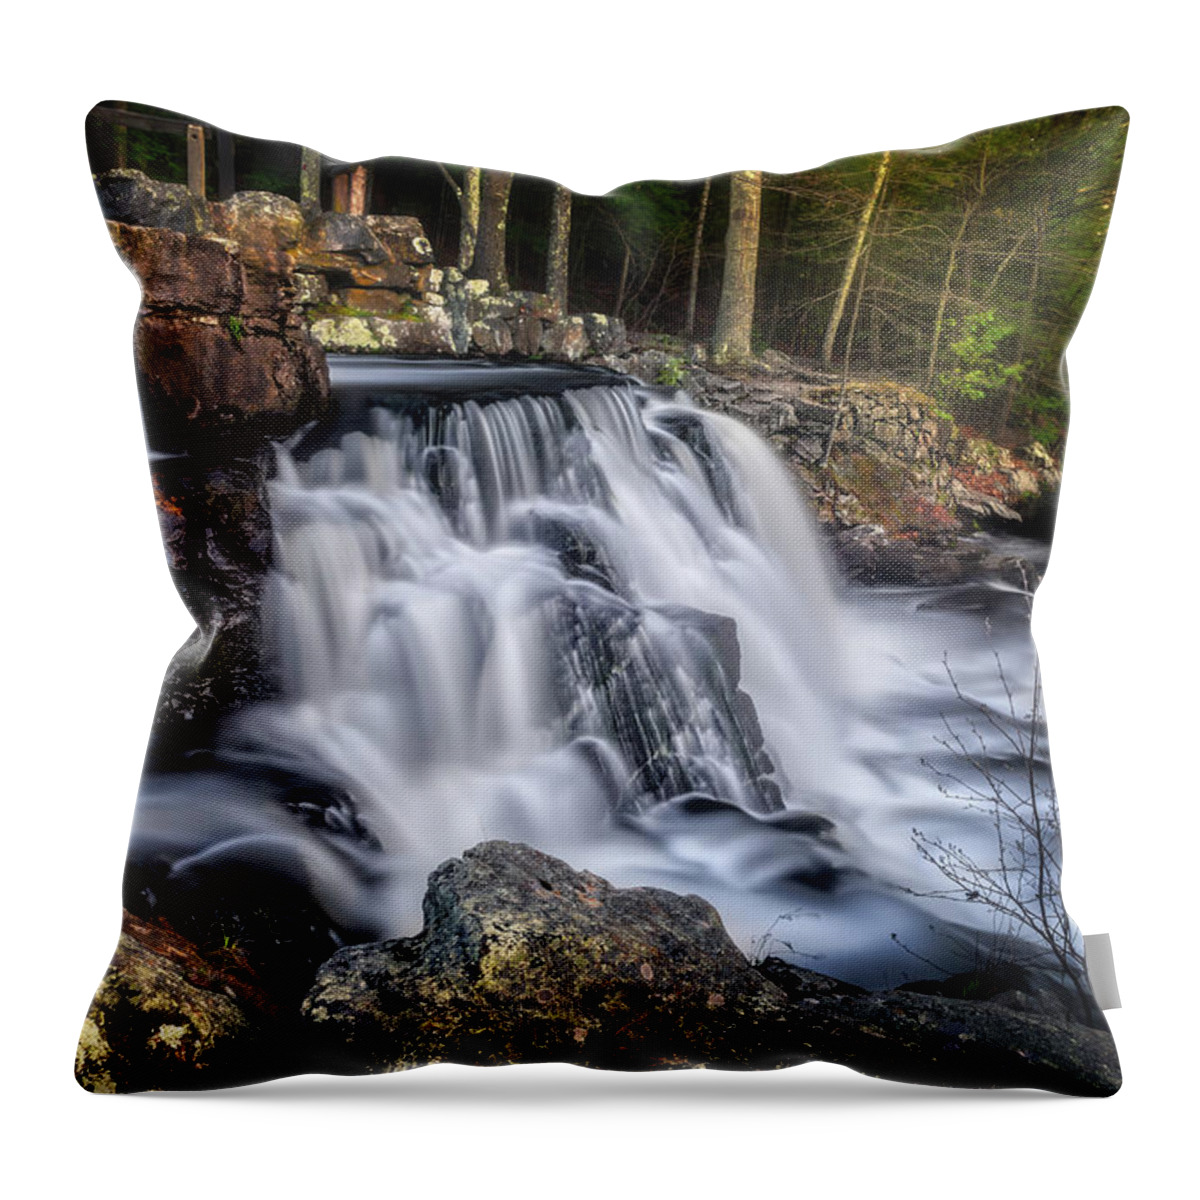 2017 Throw Pillow featuring the photograph Dancing Cascades by Simmie Reagor